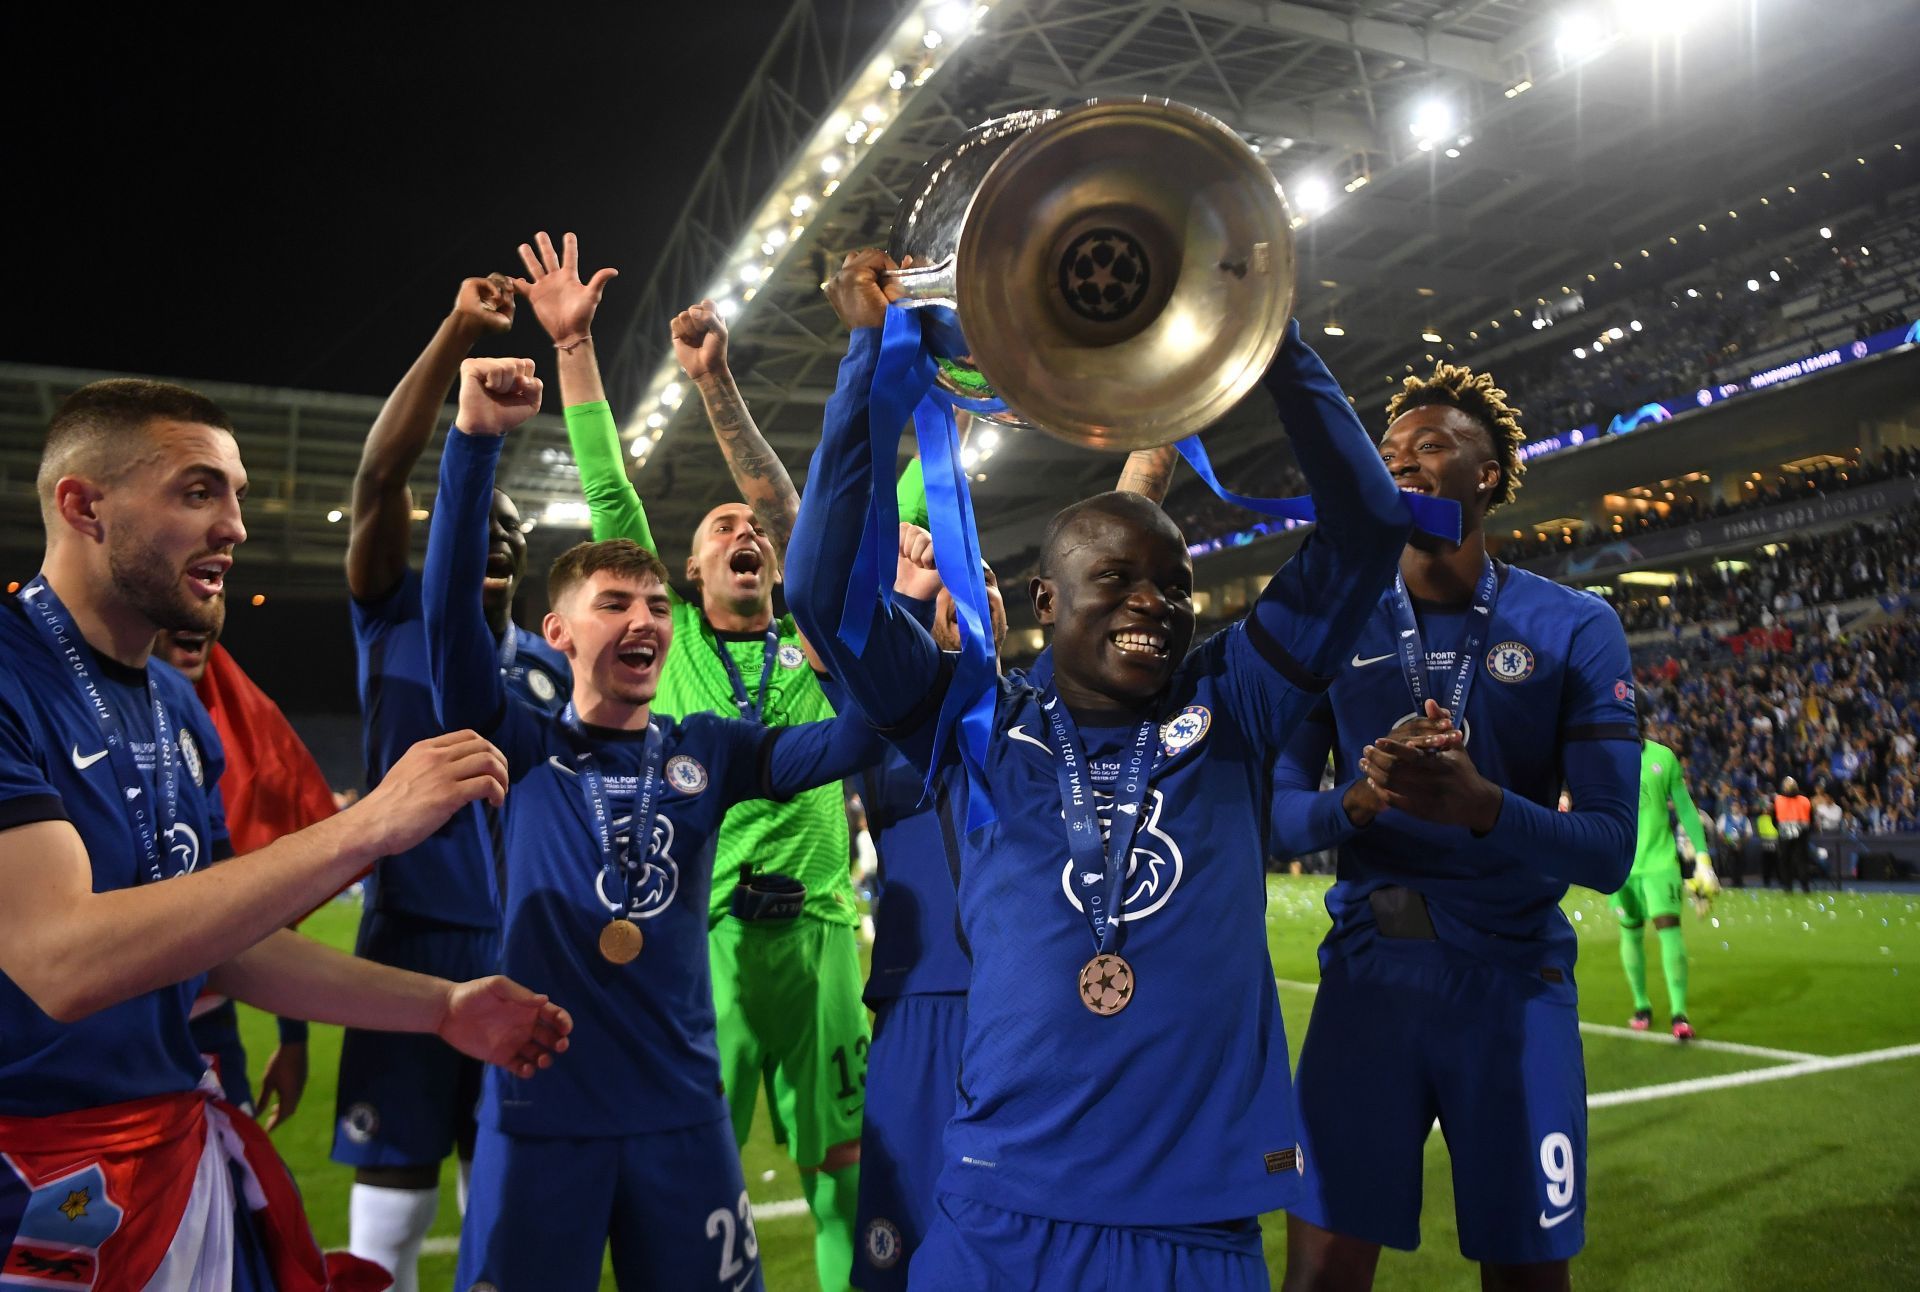 Chelsea recently won the FIFA Club World Cup